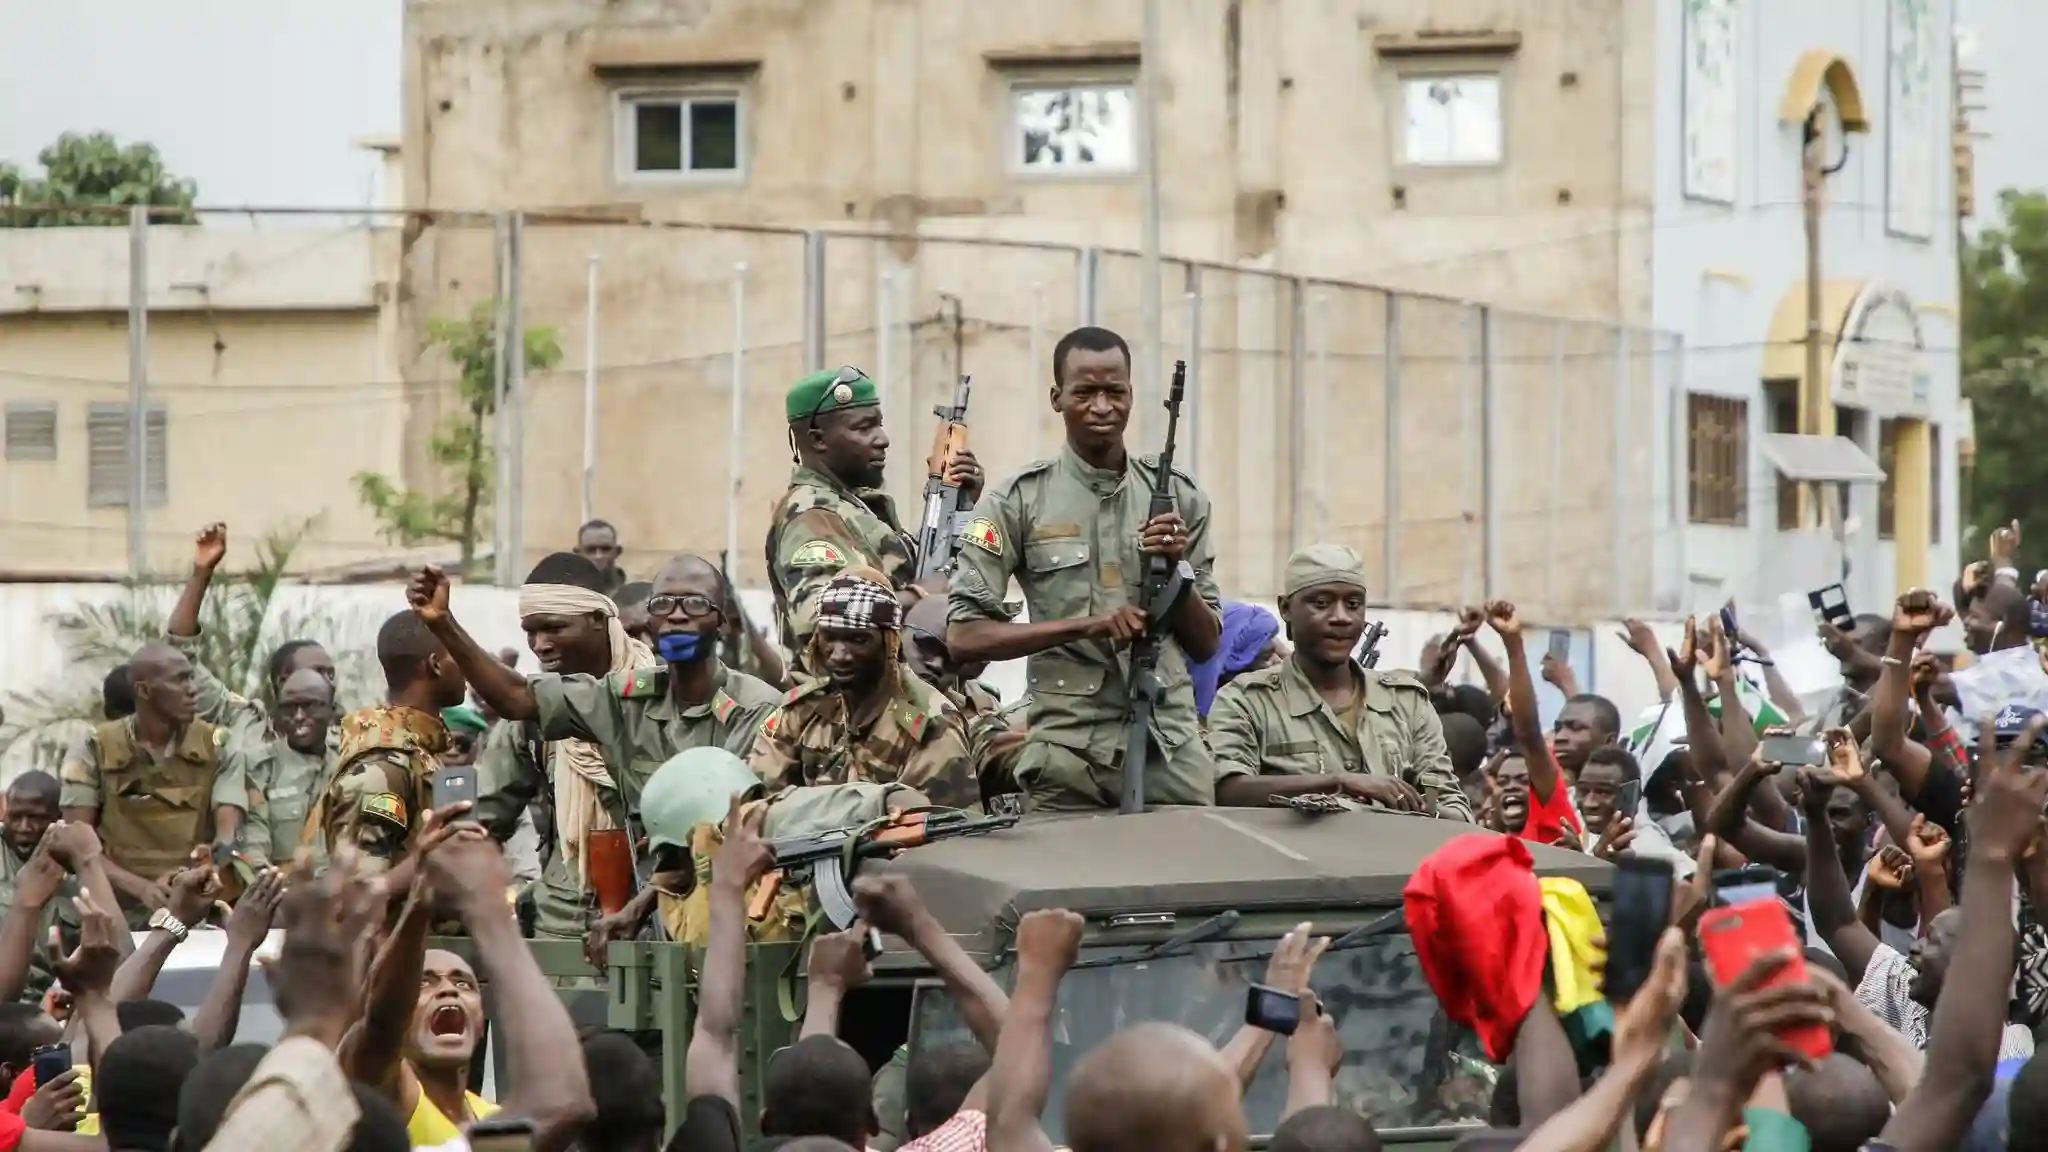 AU Suspends Mali's Membership After The Coup That Ousted The Country's President